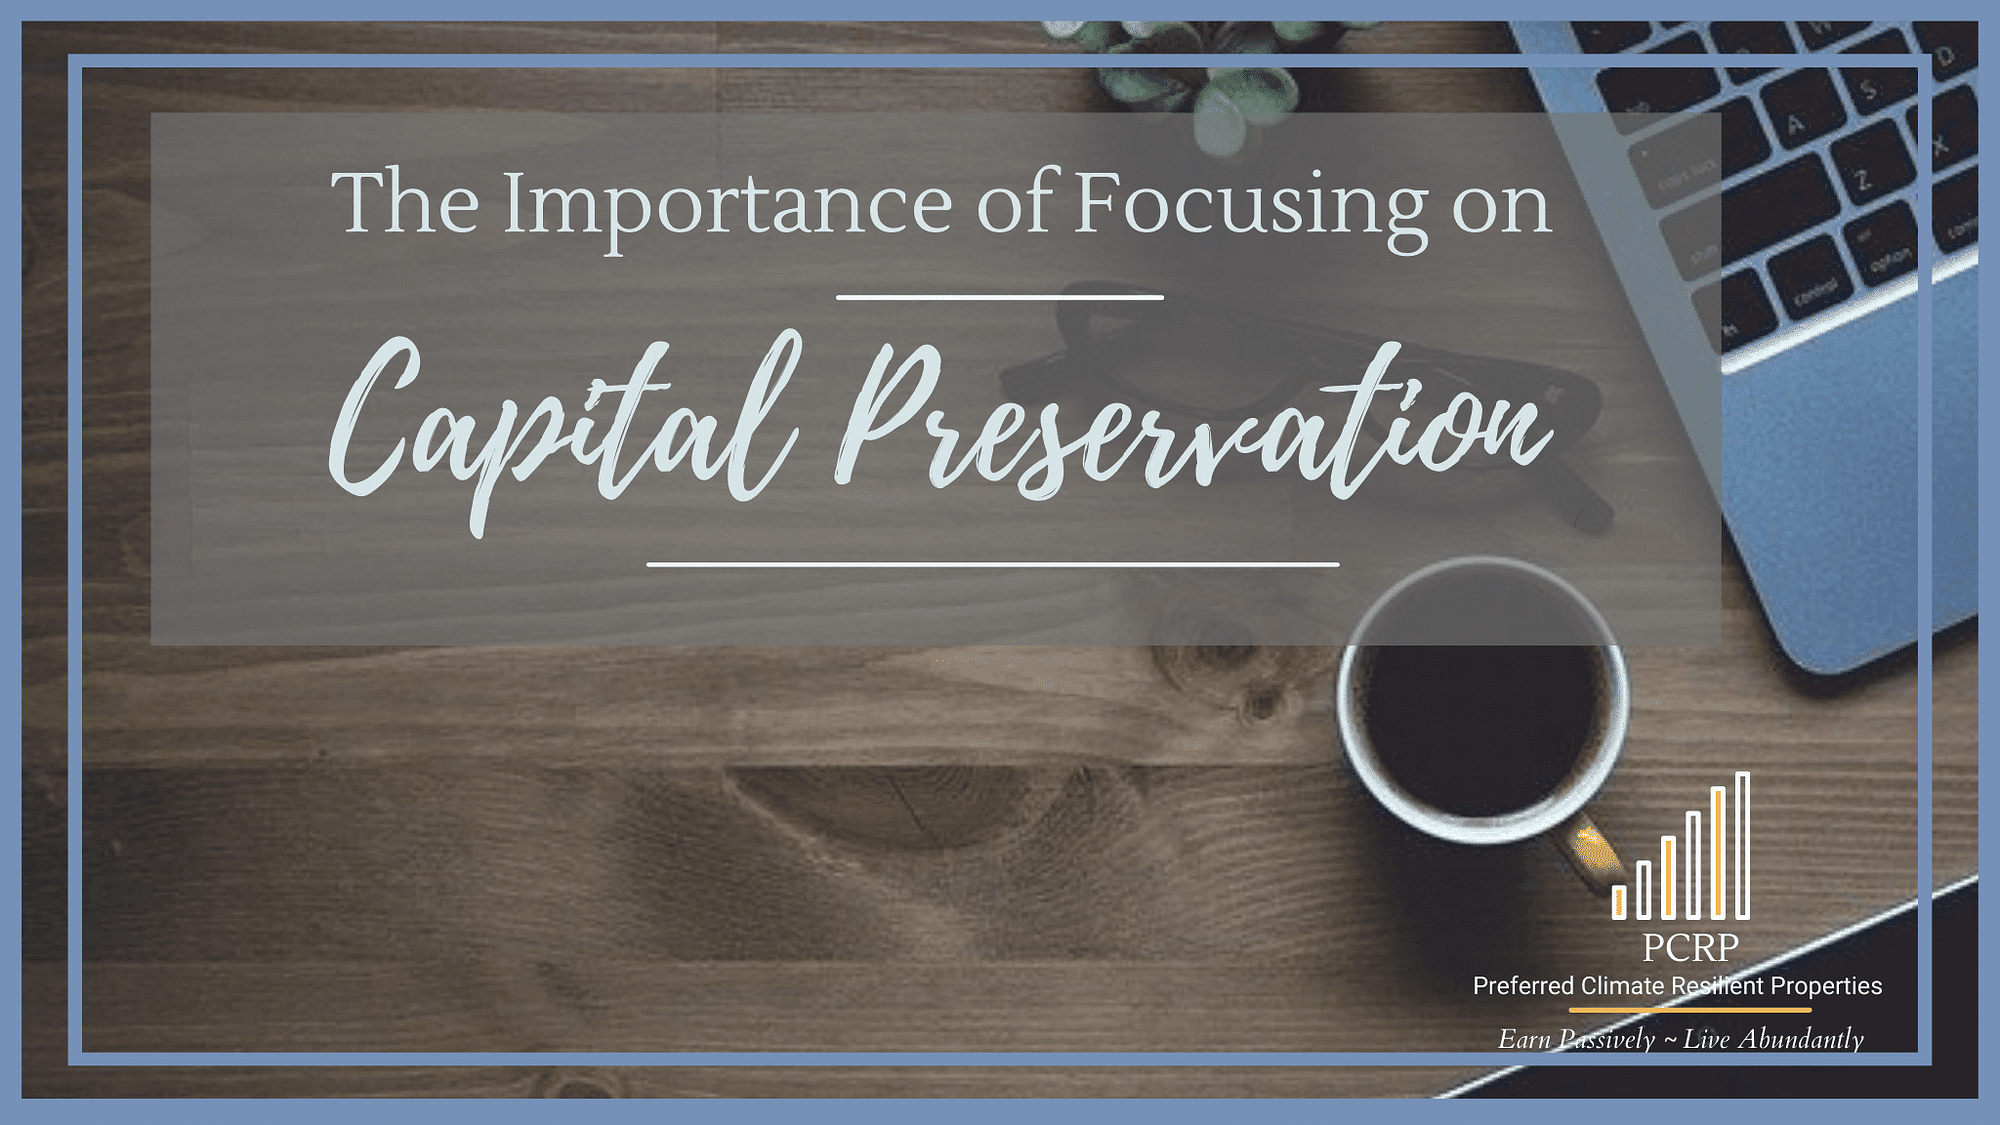 The importance of focusing on capital preservation in real estate investing